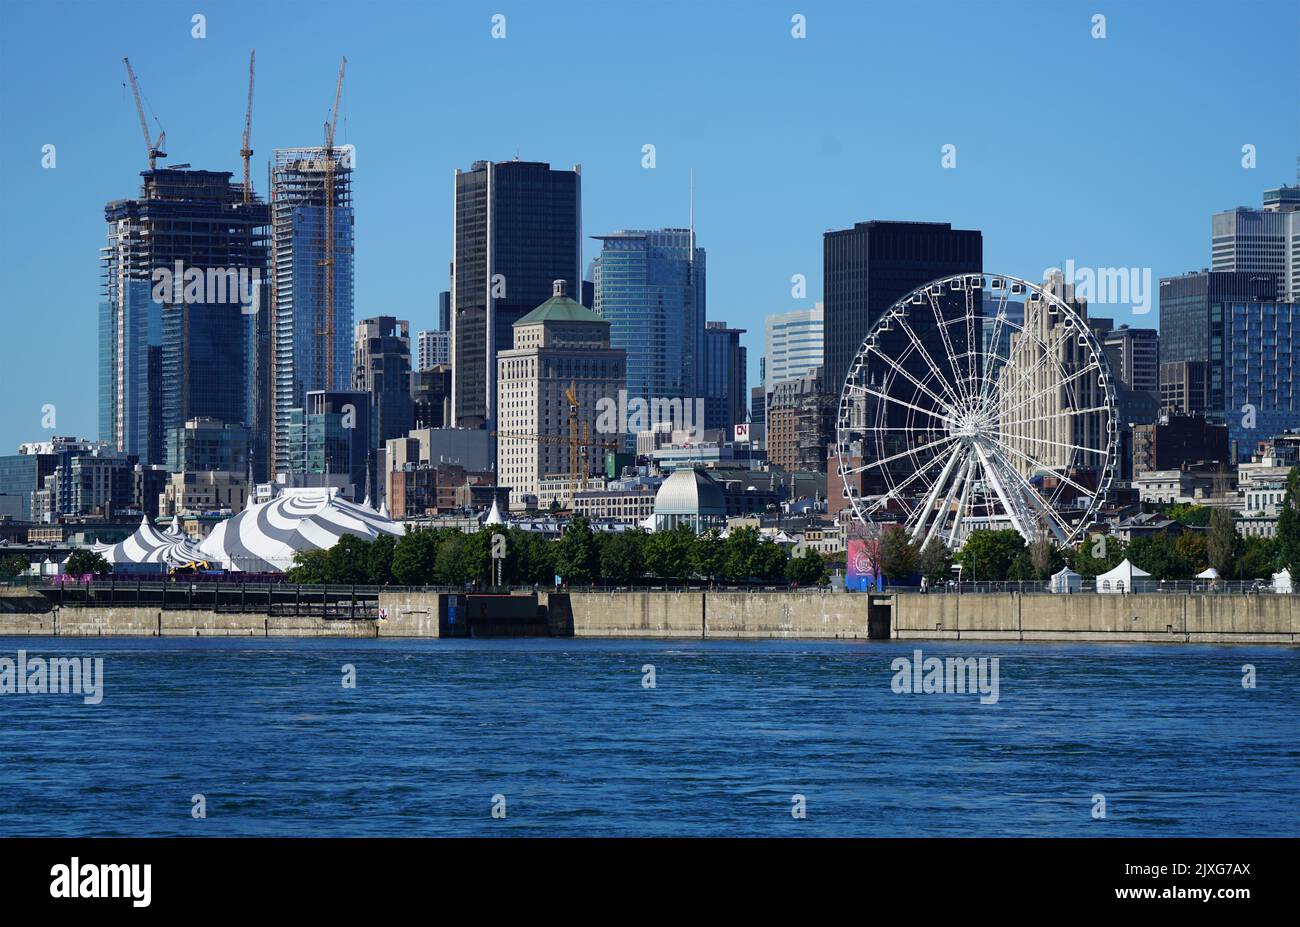 View of Montreal's downtown core.Montreal.Quebec,Canada.Alamy Live News/Mario Beauregard Stock Photo